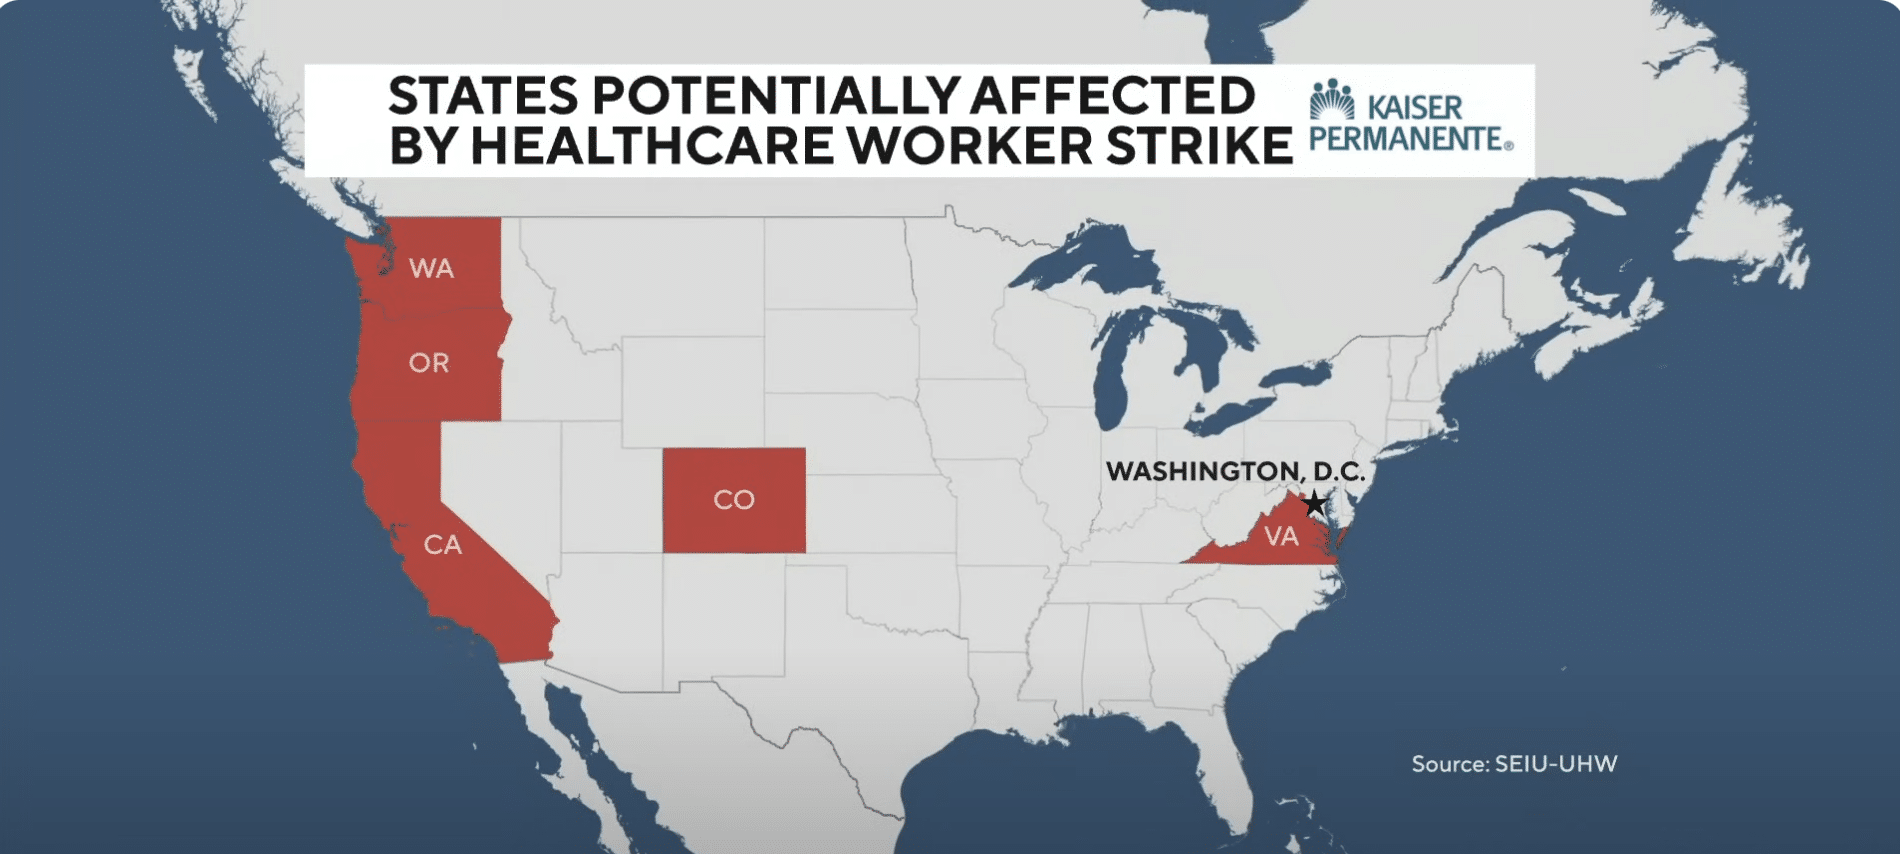 Thousands of healthcare workers go on strike in multiple states